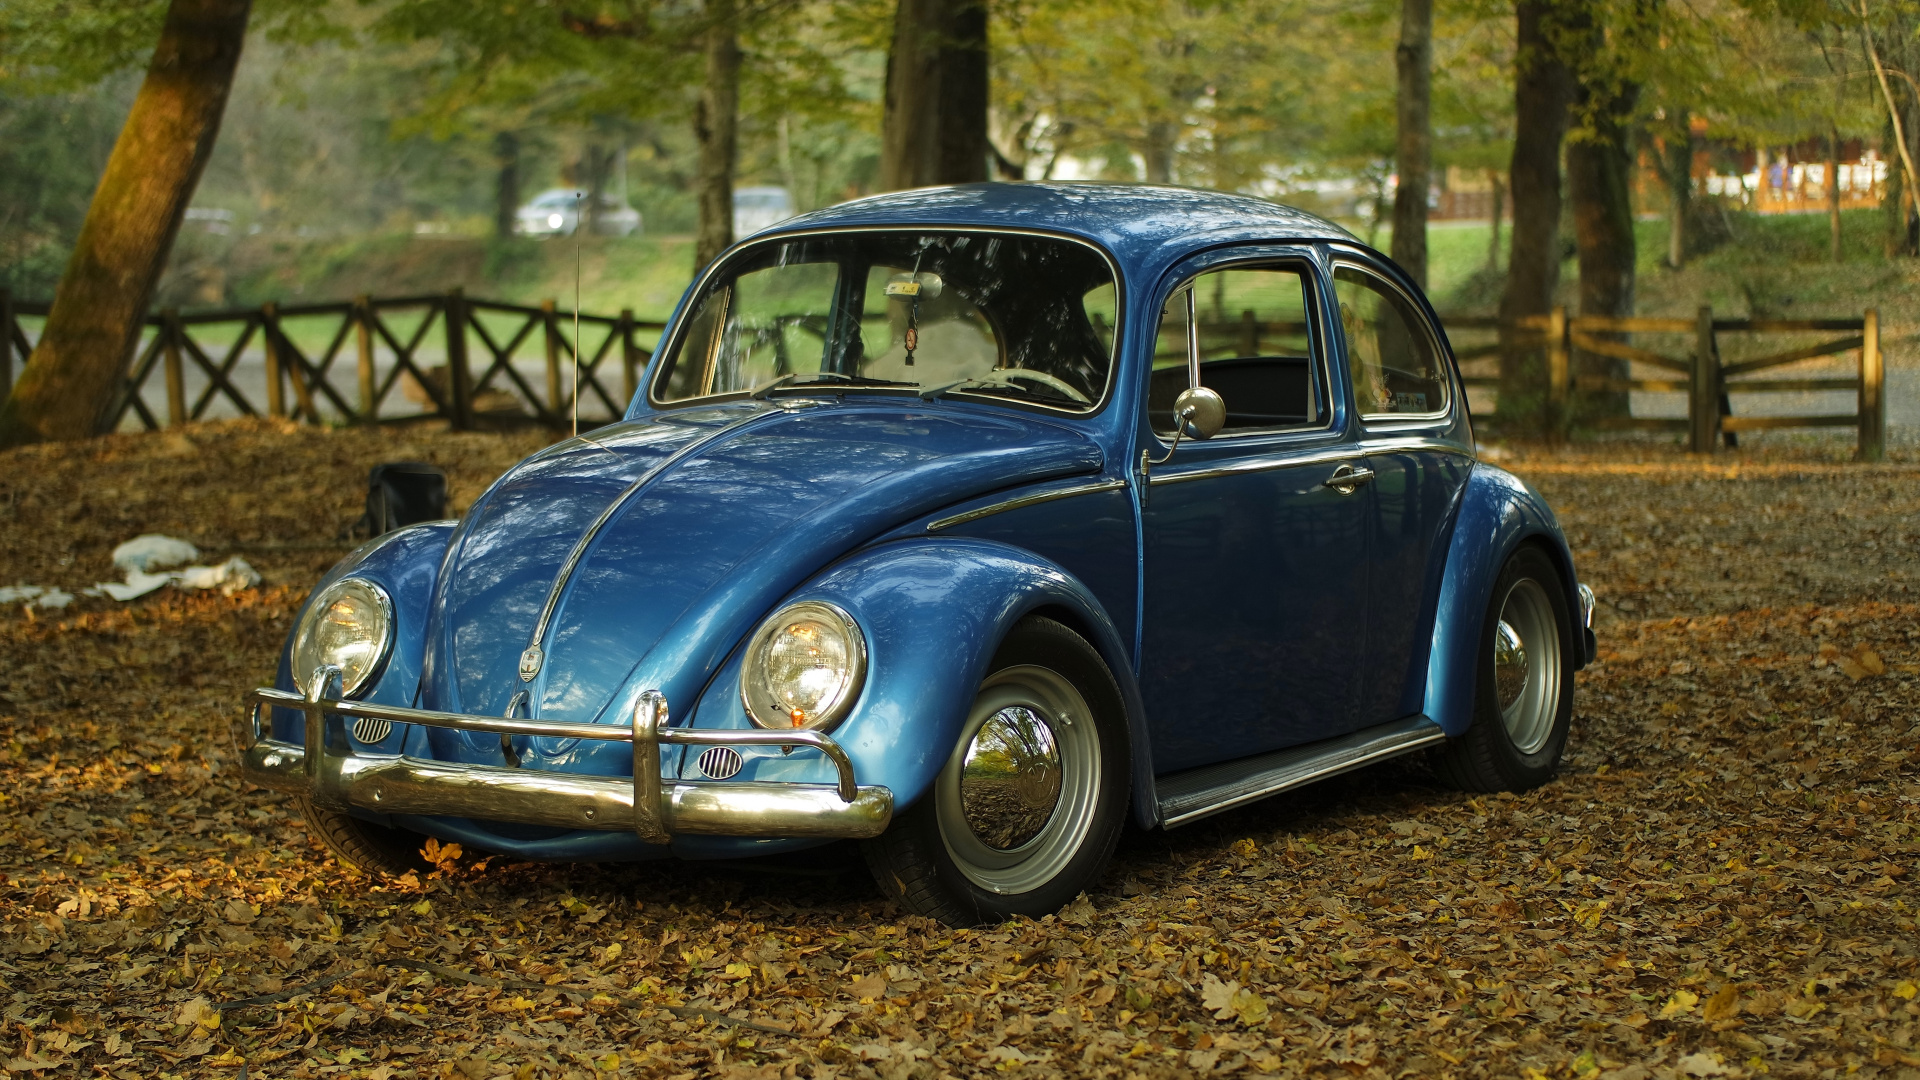 Blue Volkswagen Beetle on Brown Dried Leaves During Daytime. Wallpaper in 1920x1080 Resolution